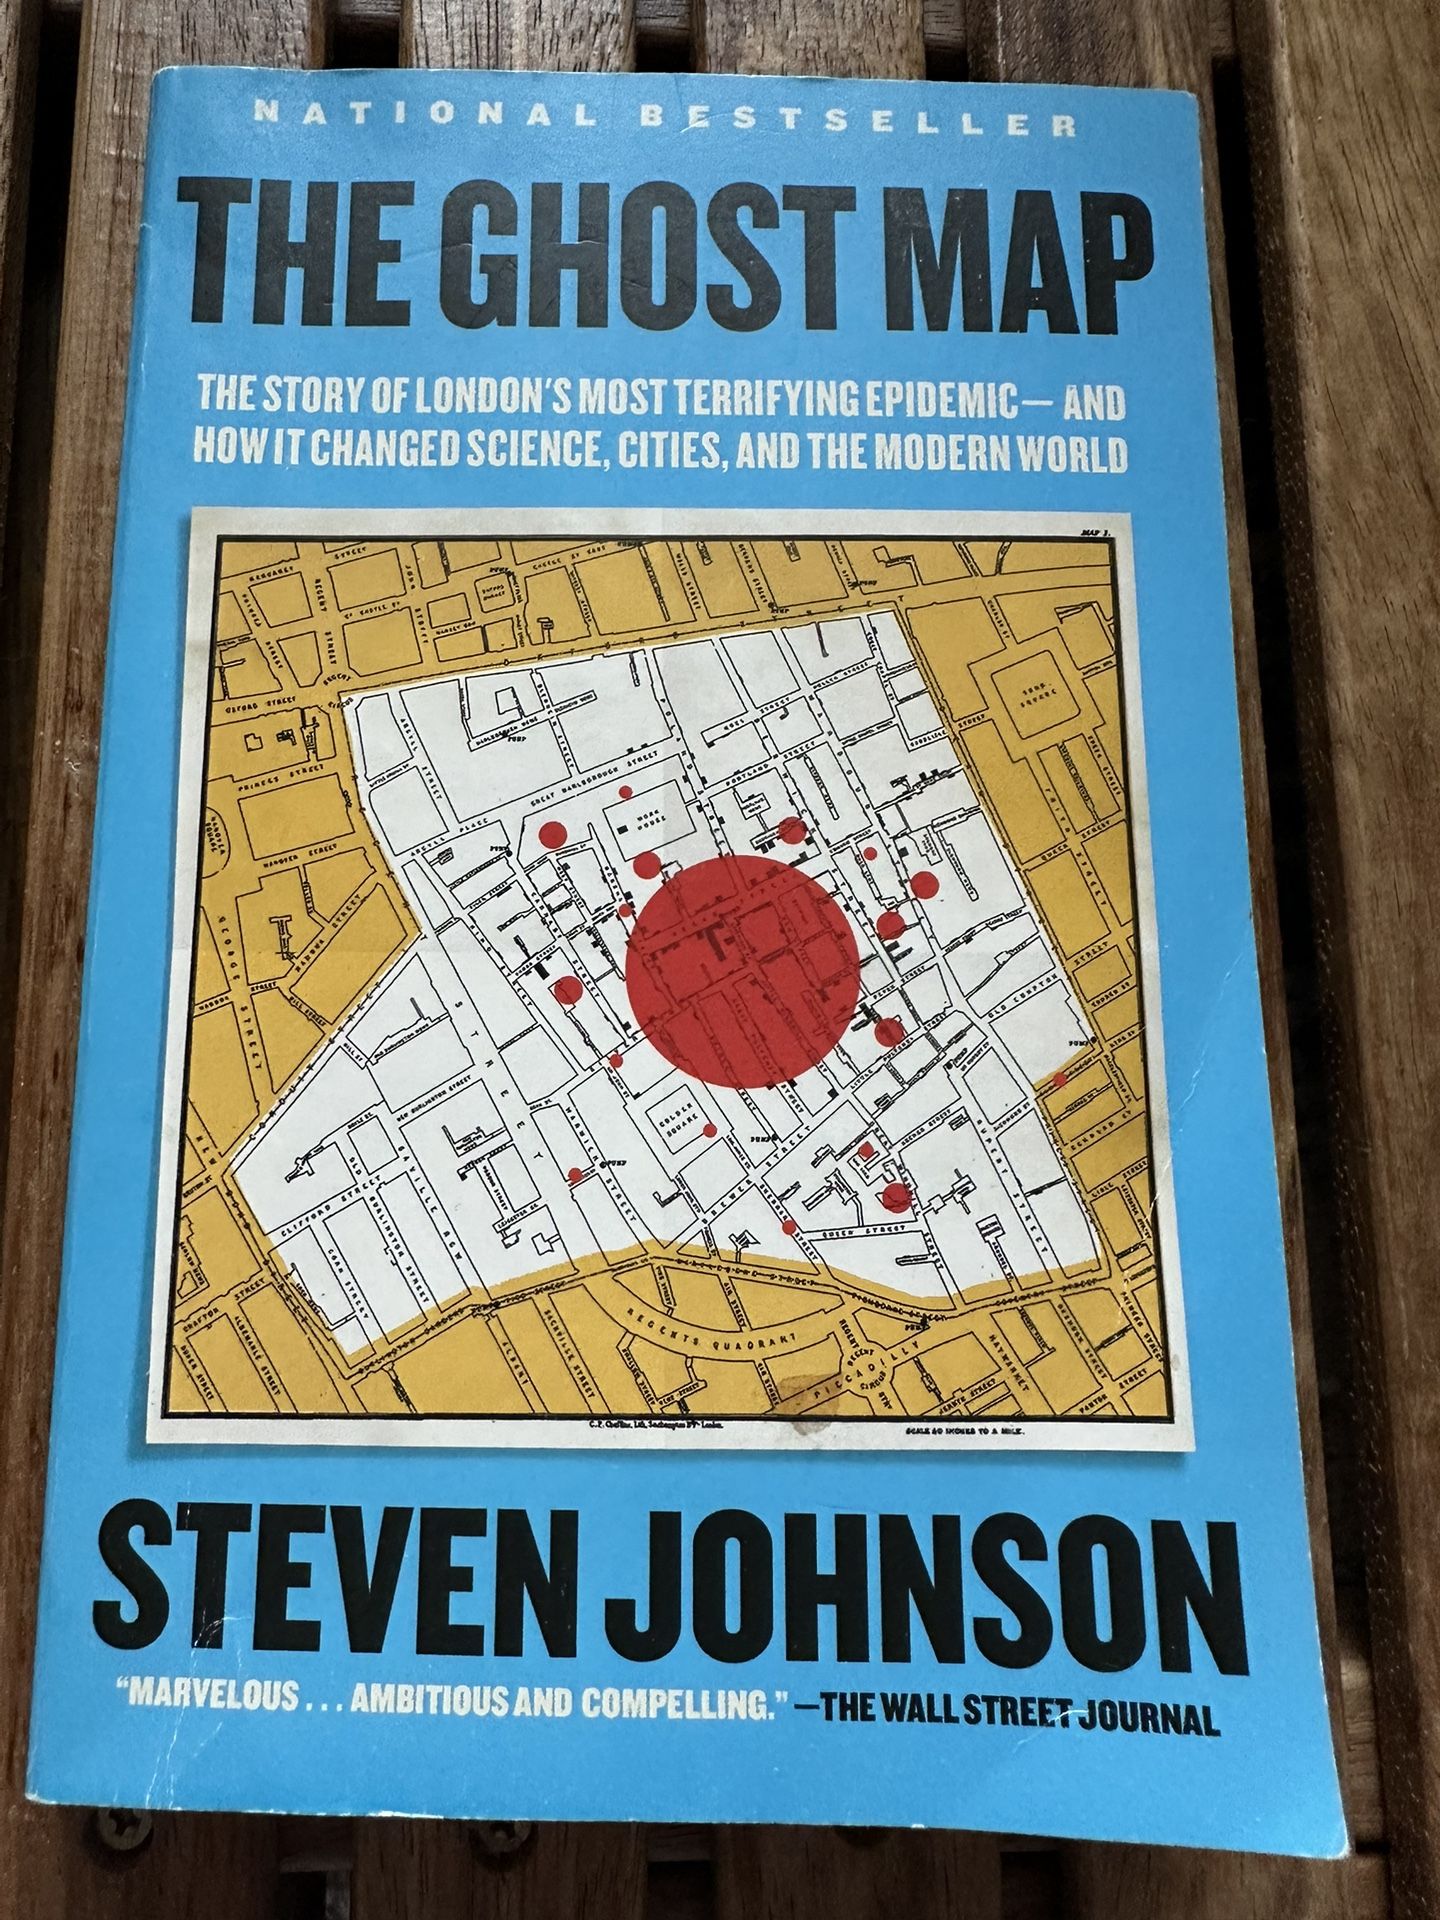 The Ghost Map: The Story of London's Most Terrifying Epidemic - and How it Changed Science, Cities and the Modern World By Steven Johnson